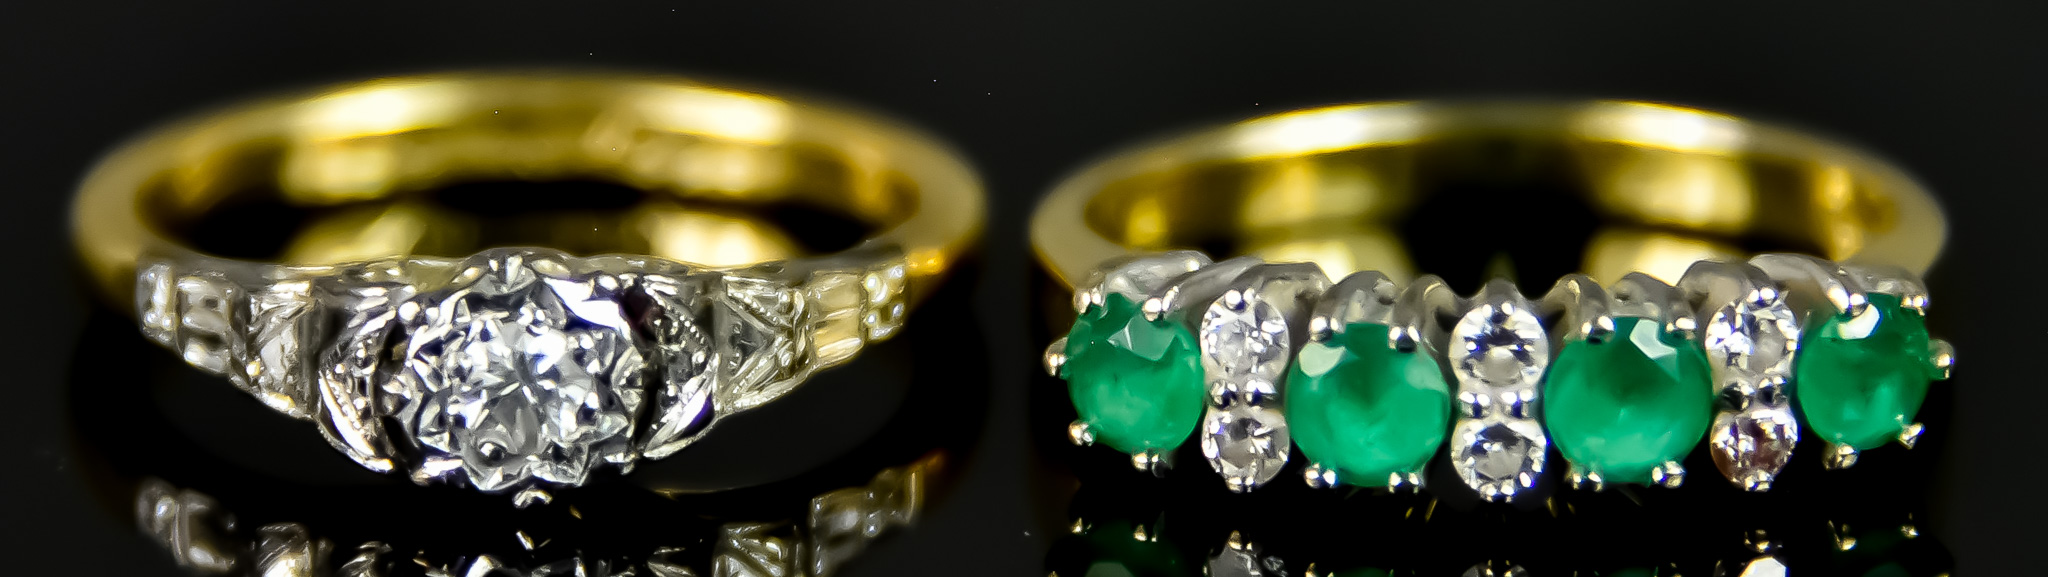 Two 18ct Gold Gem Set Rings, 20th Century, one set with four emerald stone, each approximately .